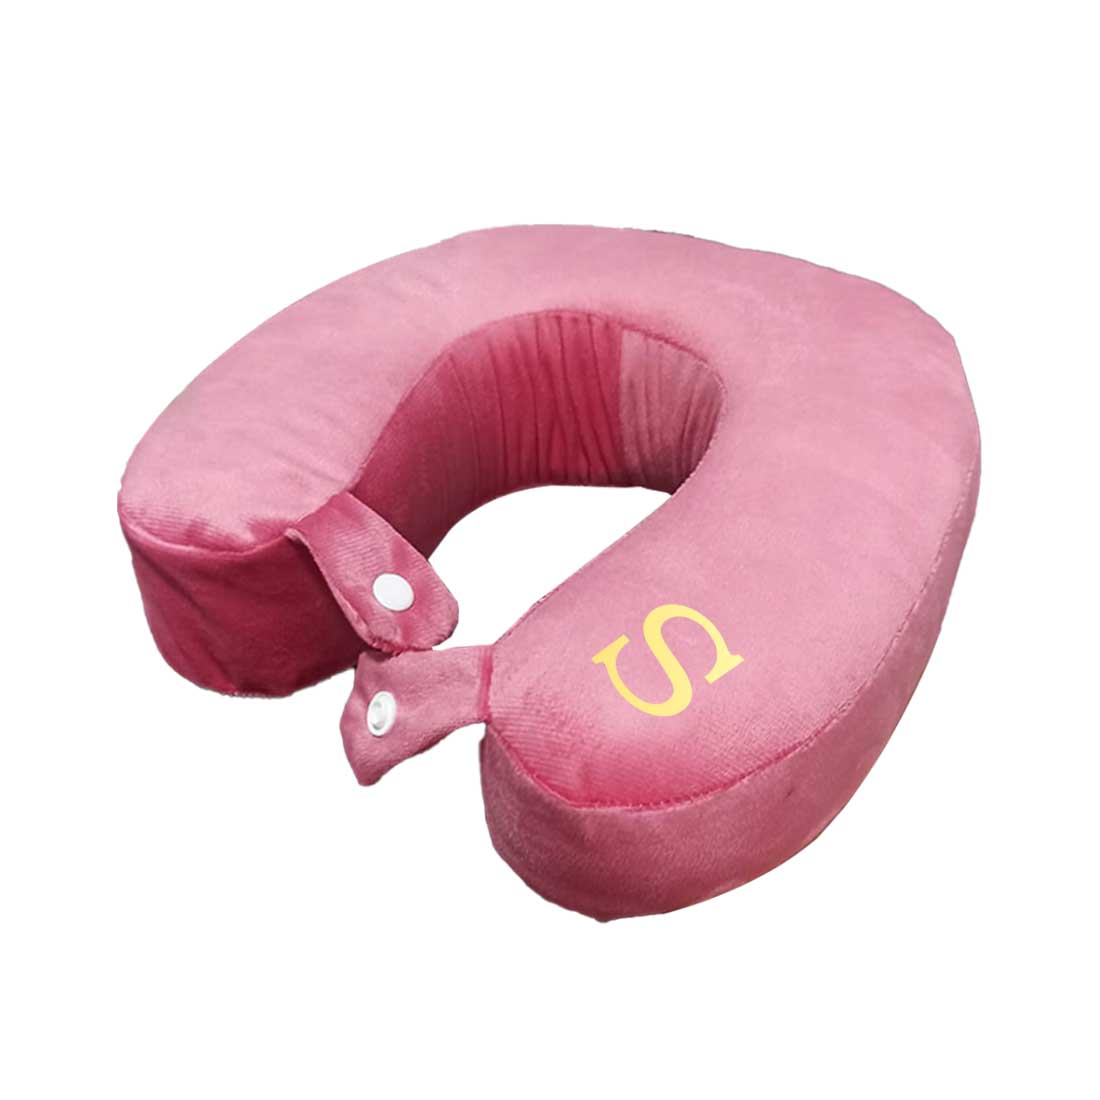 Personalized Neck Supporting Pillows with Name